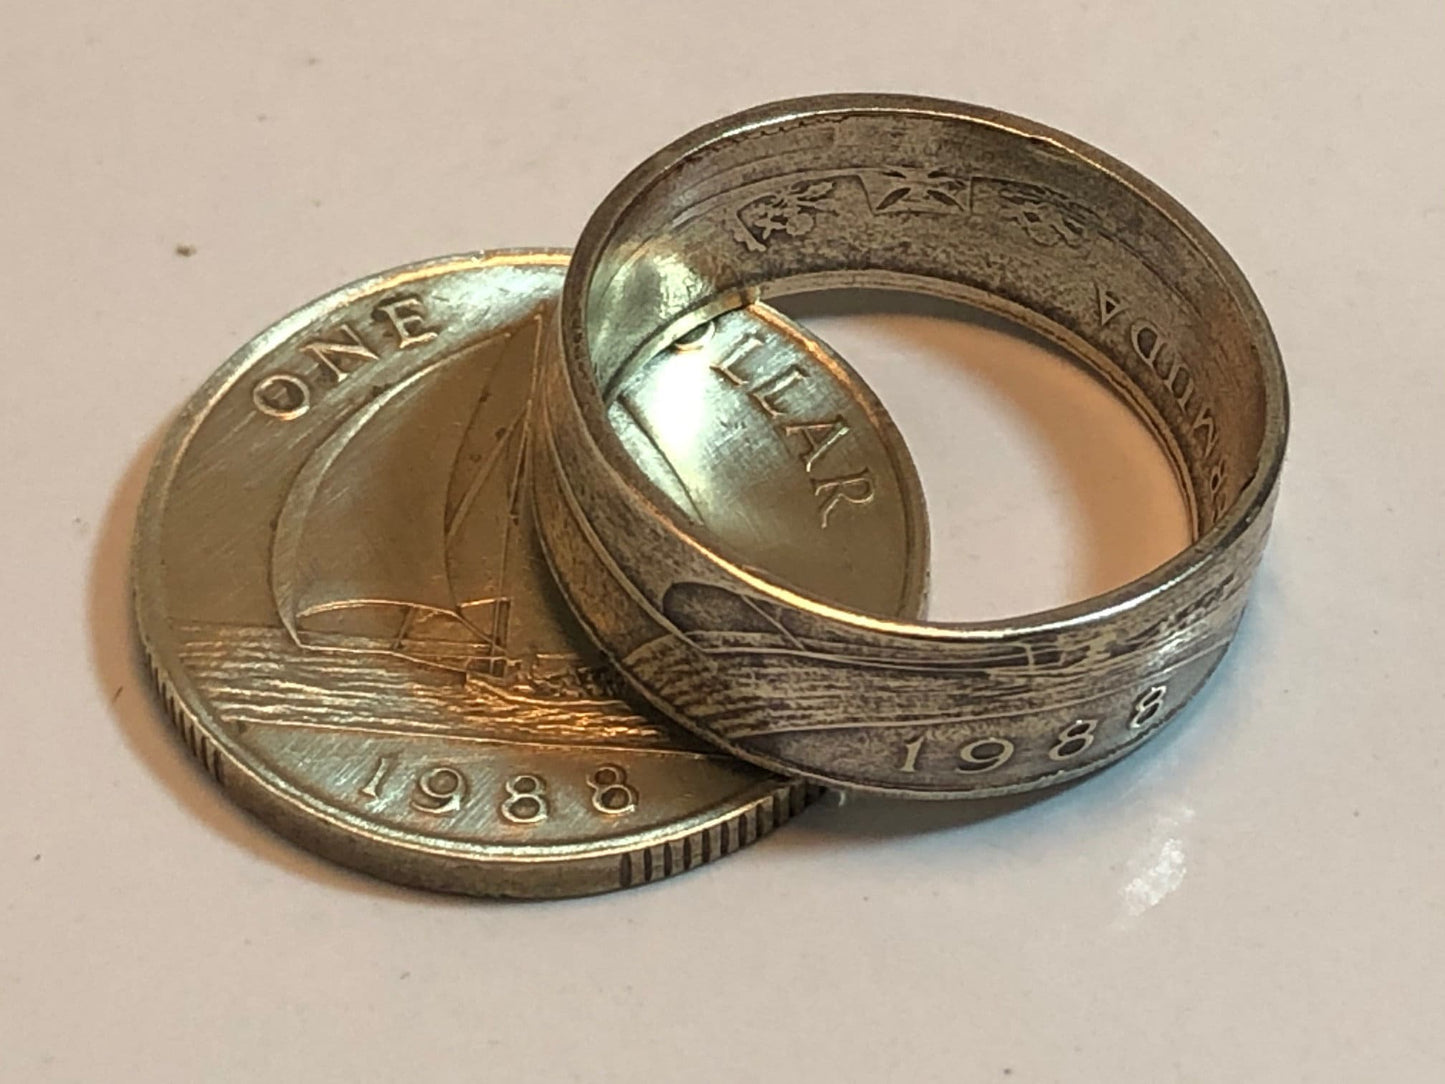 Bermuda Ring One Dollar Coin Ring Handmade Personal Charm Jewelry Ring Gift For Friend Coin Ring Gift For Him Her World Coin Collector